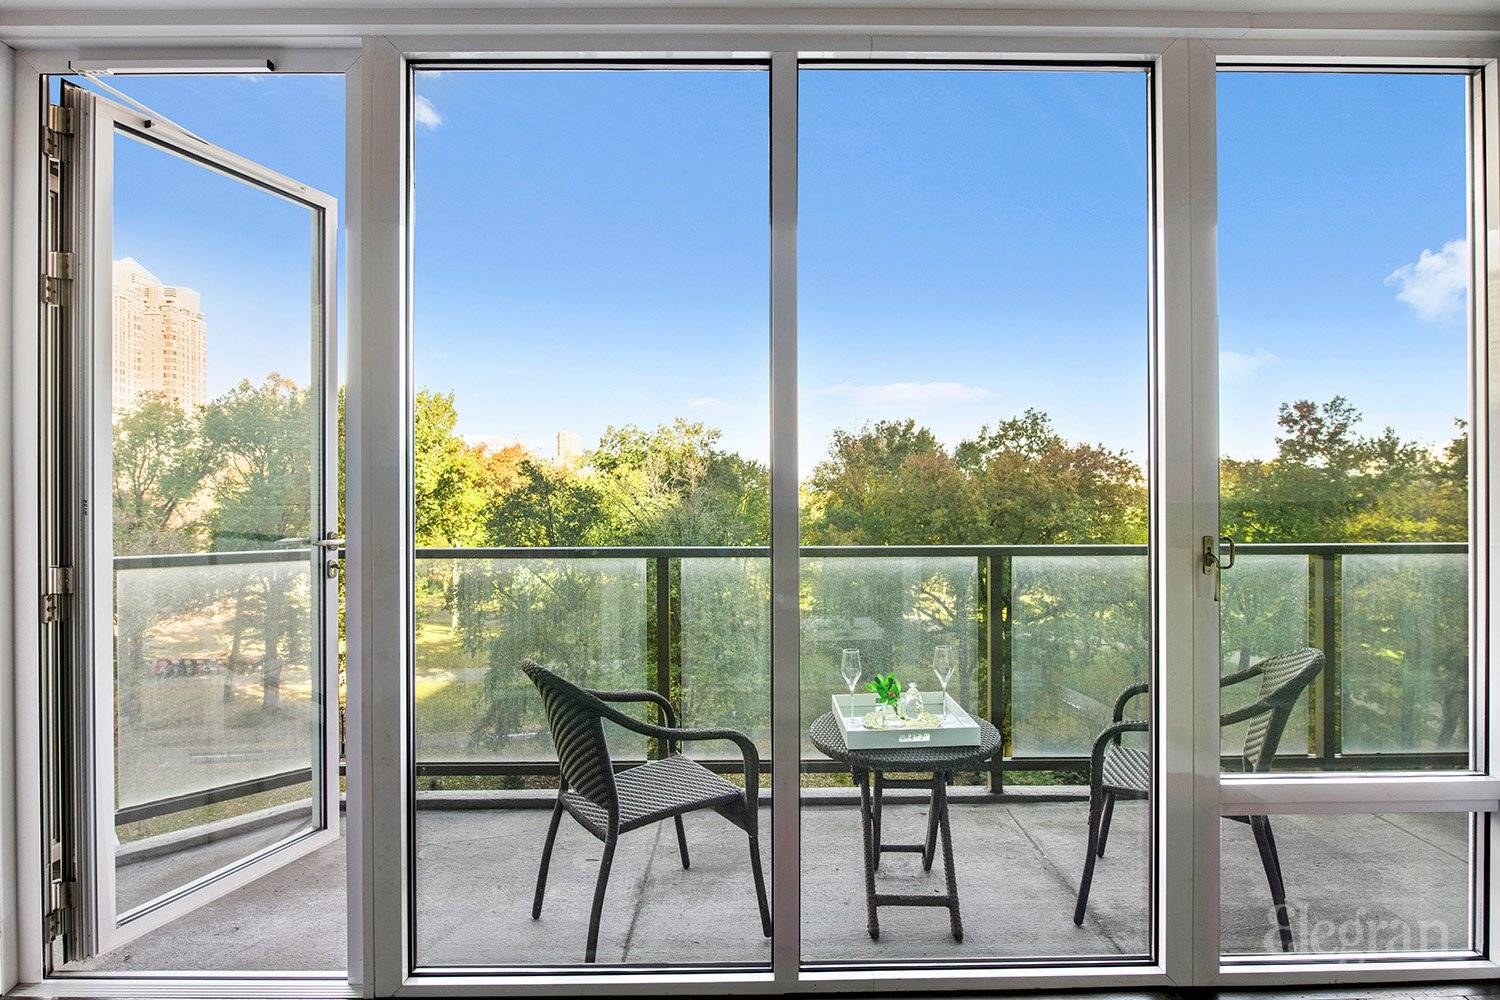 Experience breathtaking Central Park views in this meticulously renovated 2 bedroom, 2.